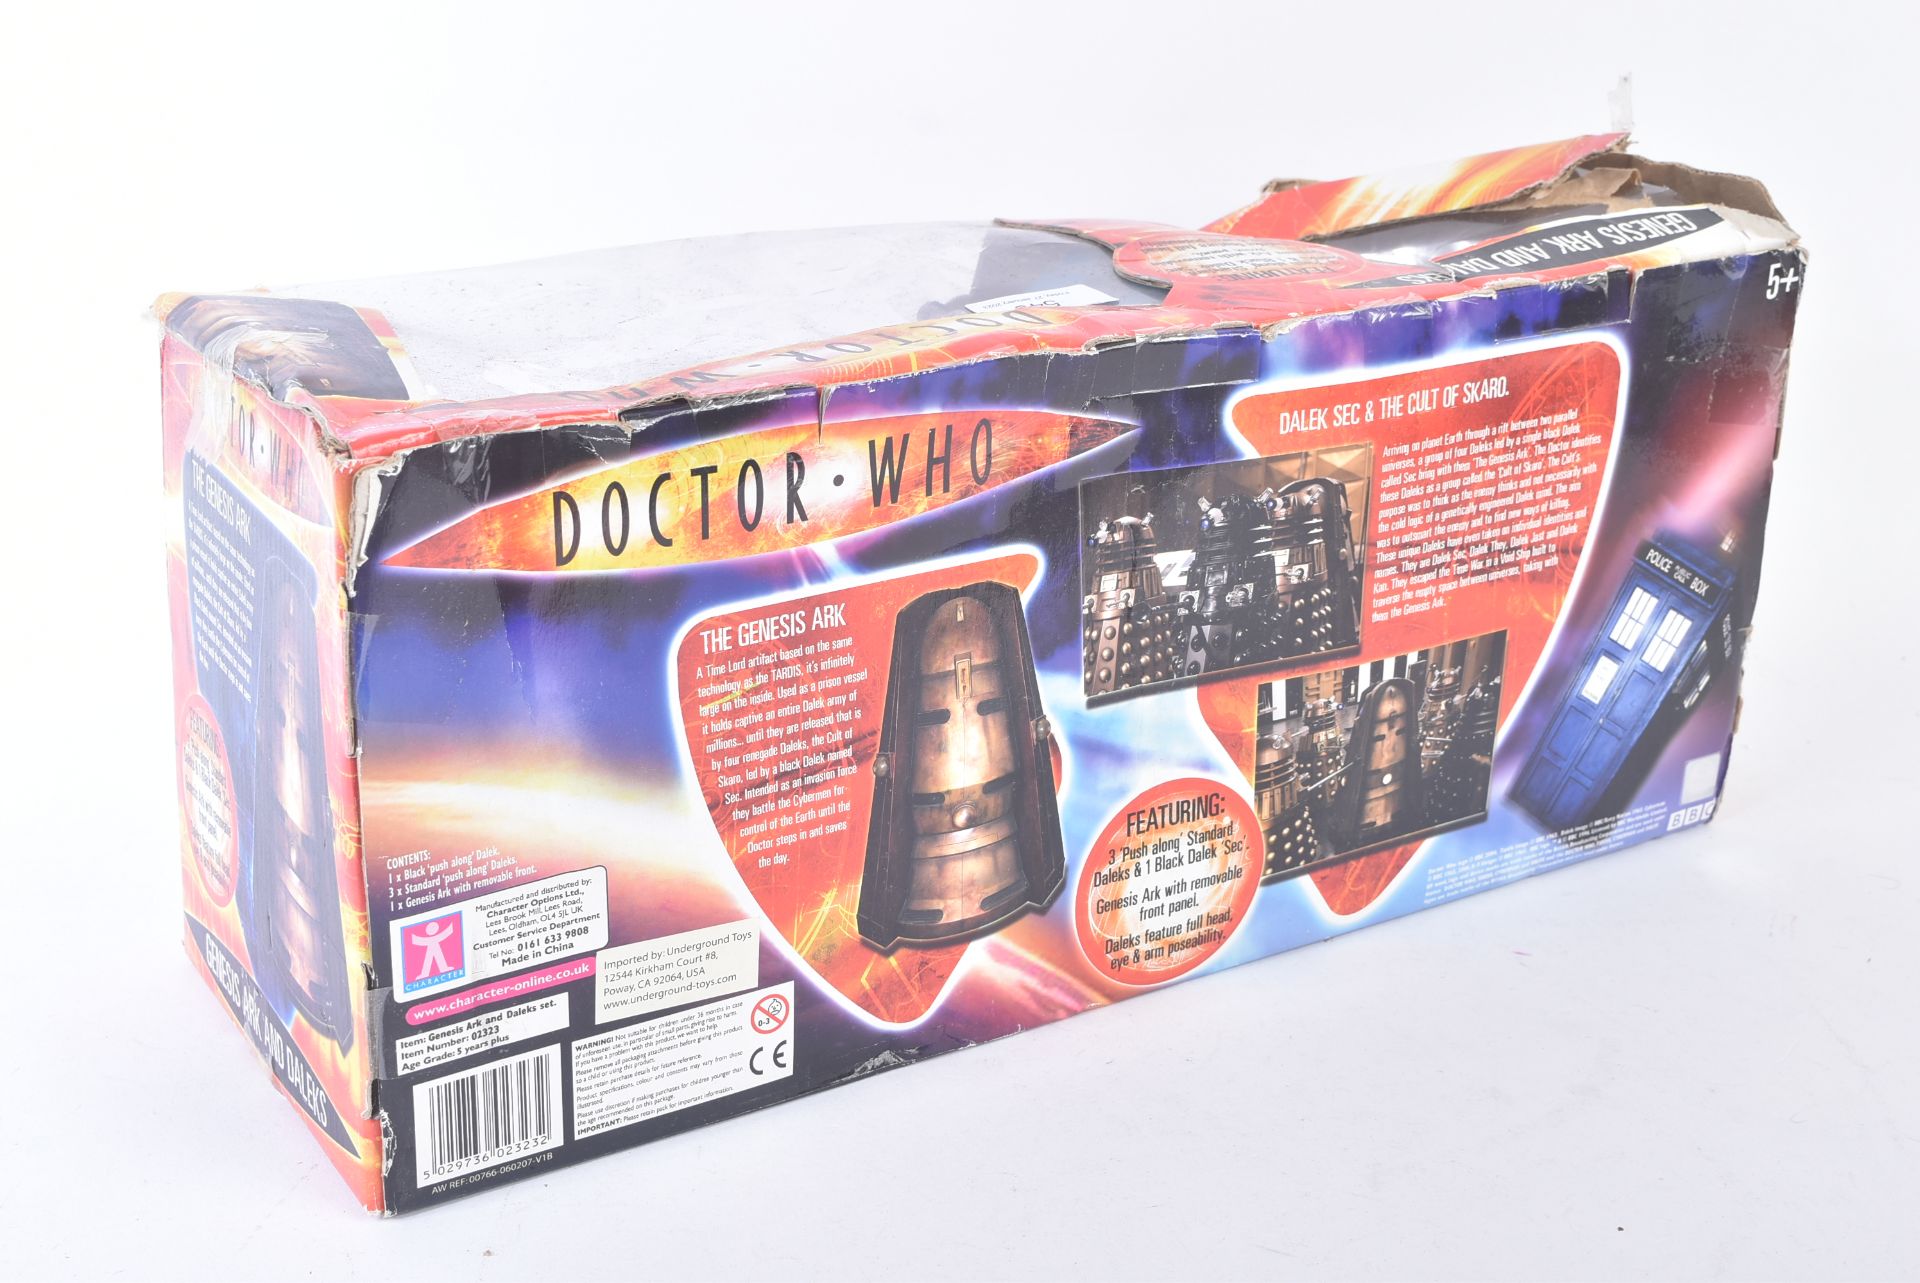 DOCTOR WHO - CHARACTER - GENESIS ARK AND DALEKS ACTION FIGURES - Image 5 of 5